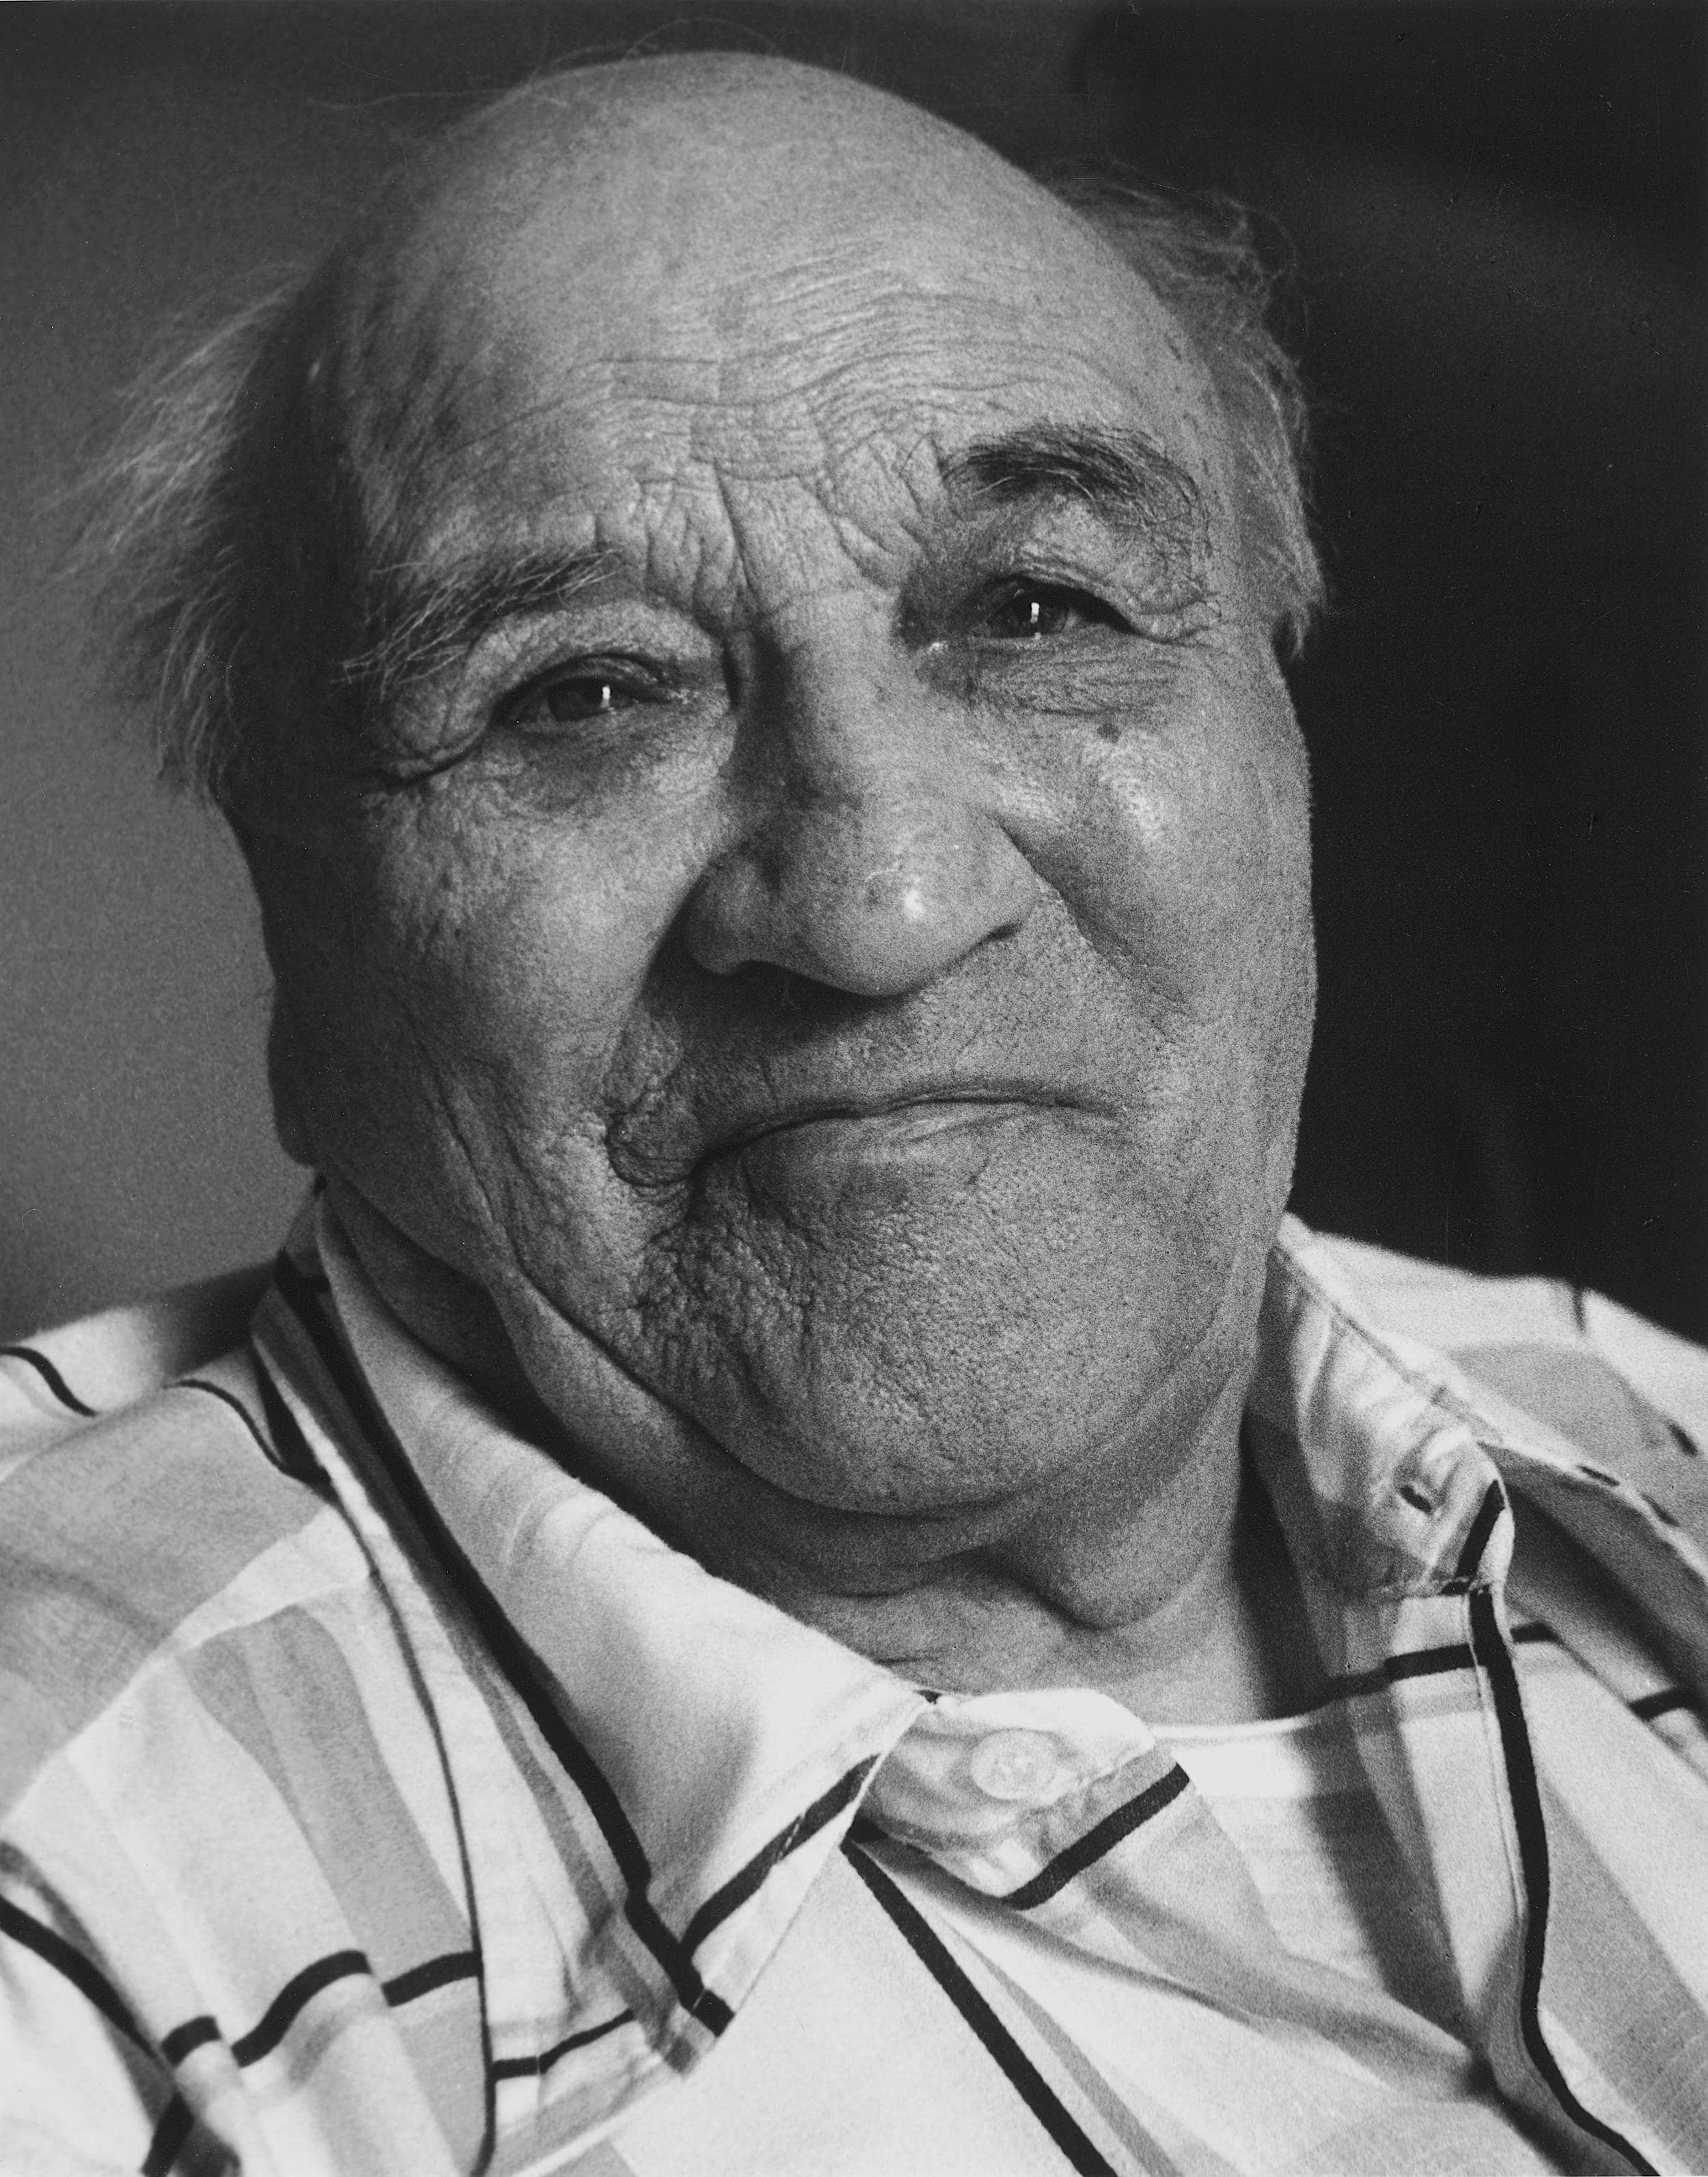 Black and white close-up photo of elderly man with strong, round shaped face.